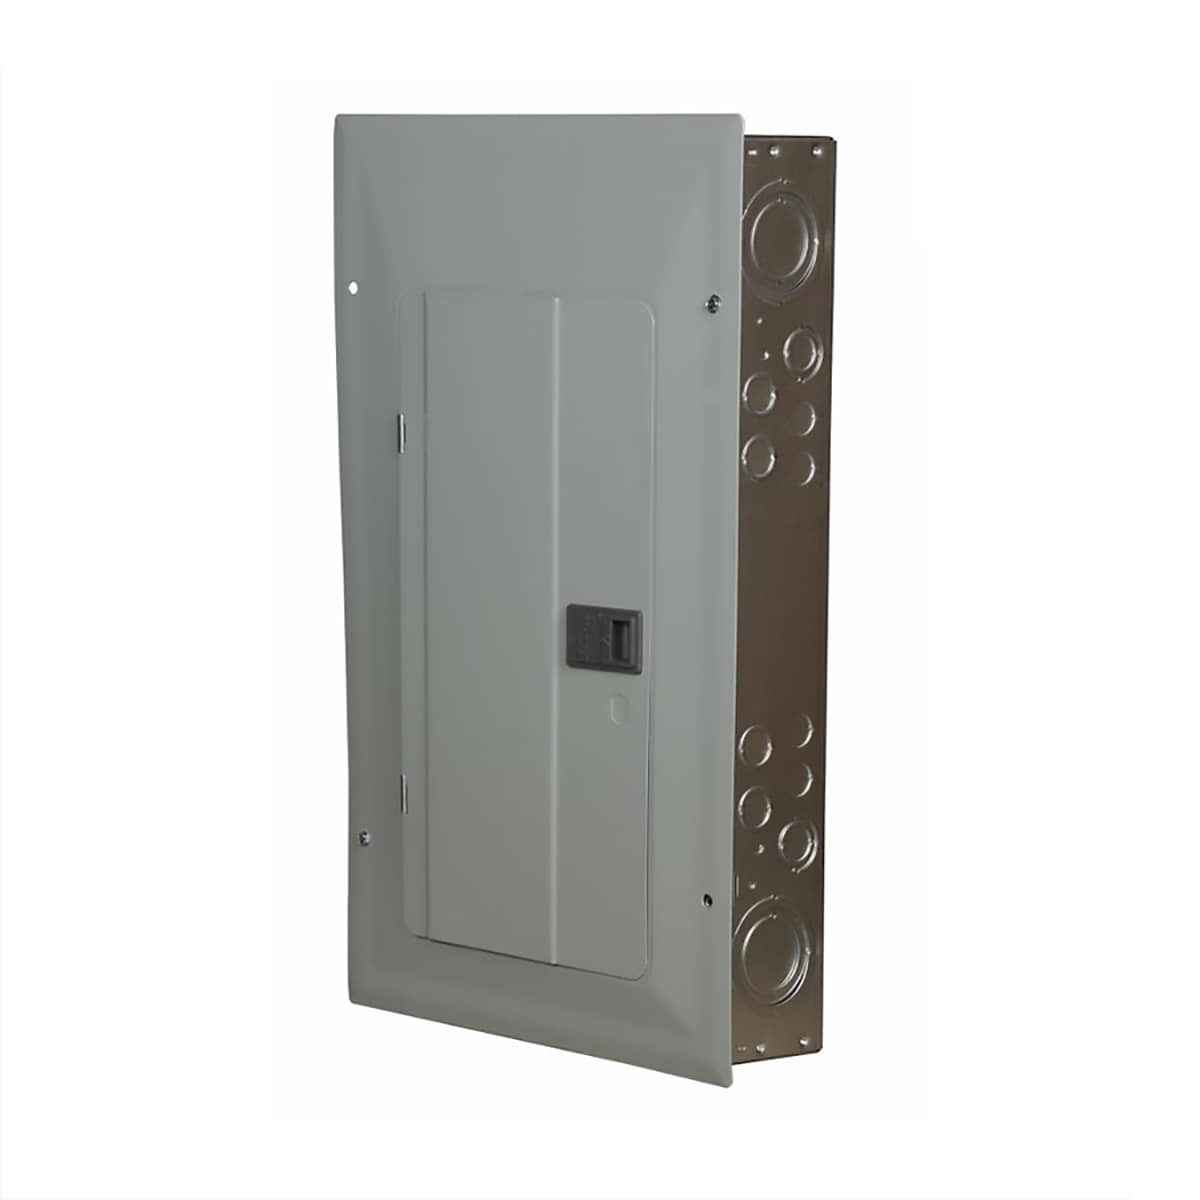 Eaton EZB2036R MCB Not Included 100 Amp 208/120volt 18 Circuit 3 Phase Panel for sale online 